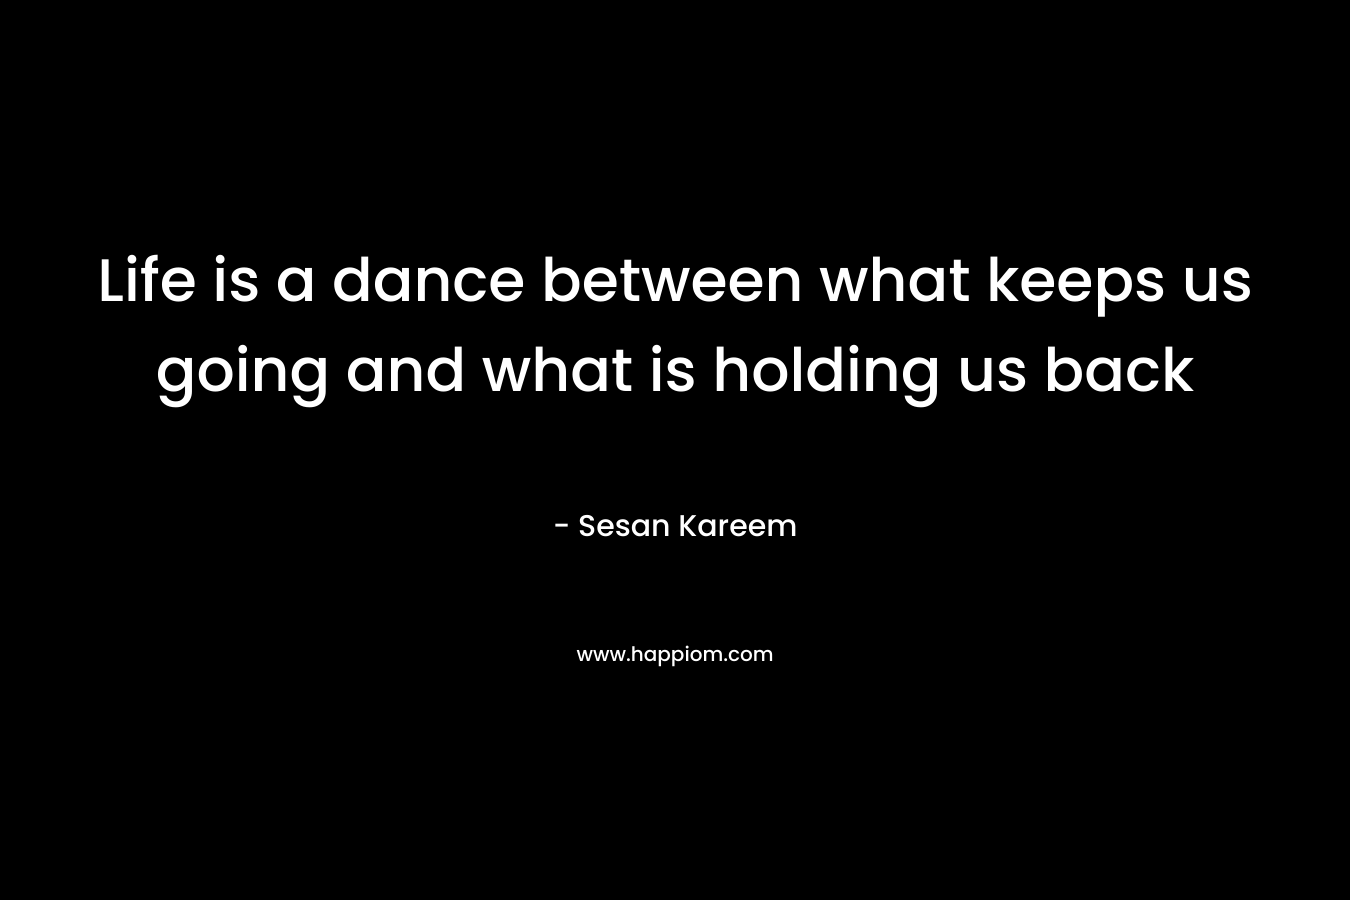 Life is a dance between what keeps us going and what is holding us back